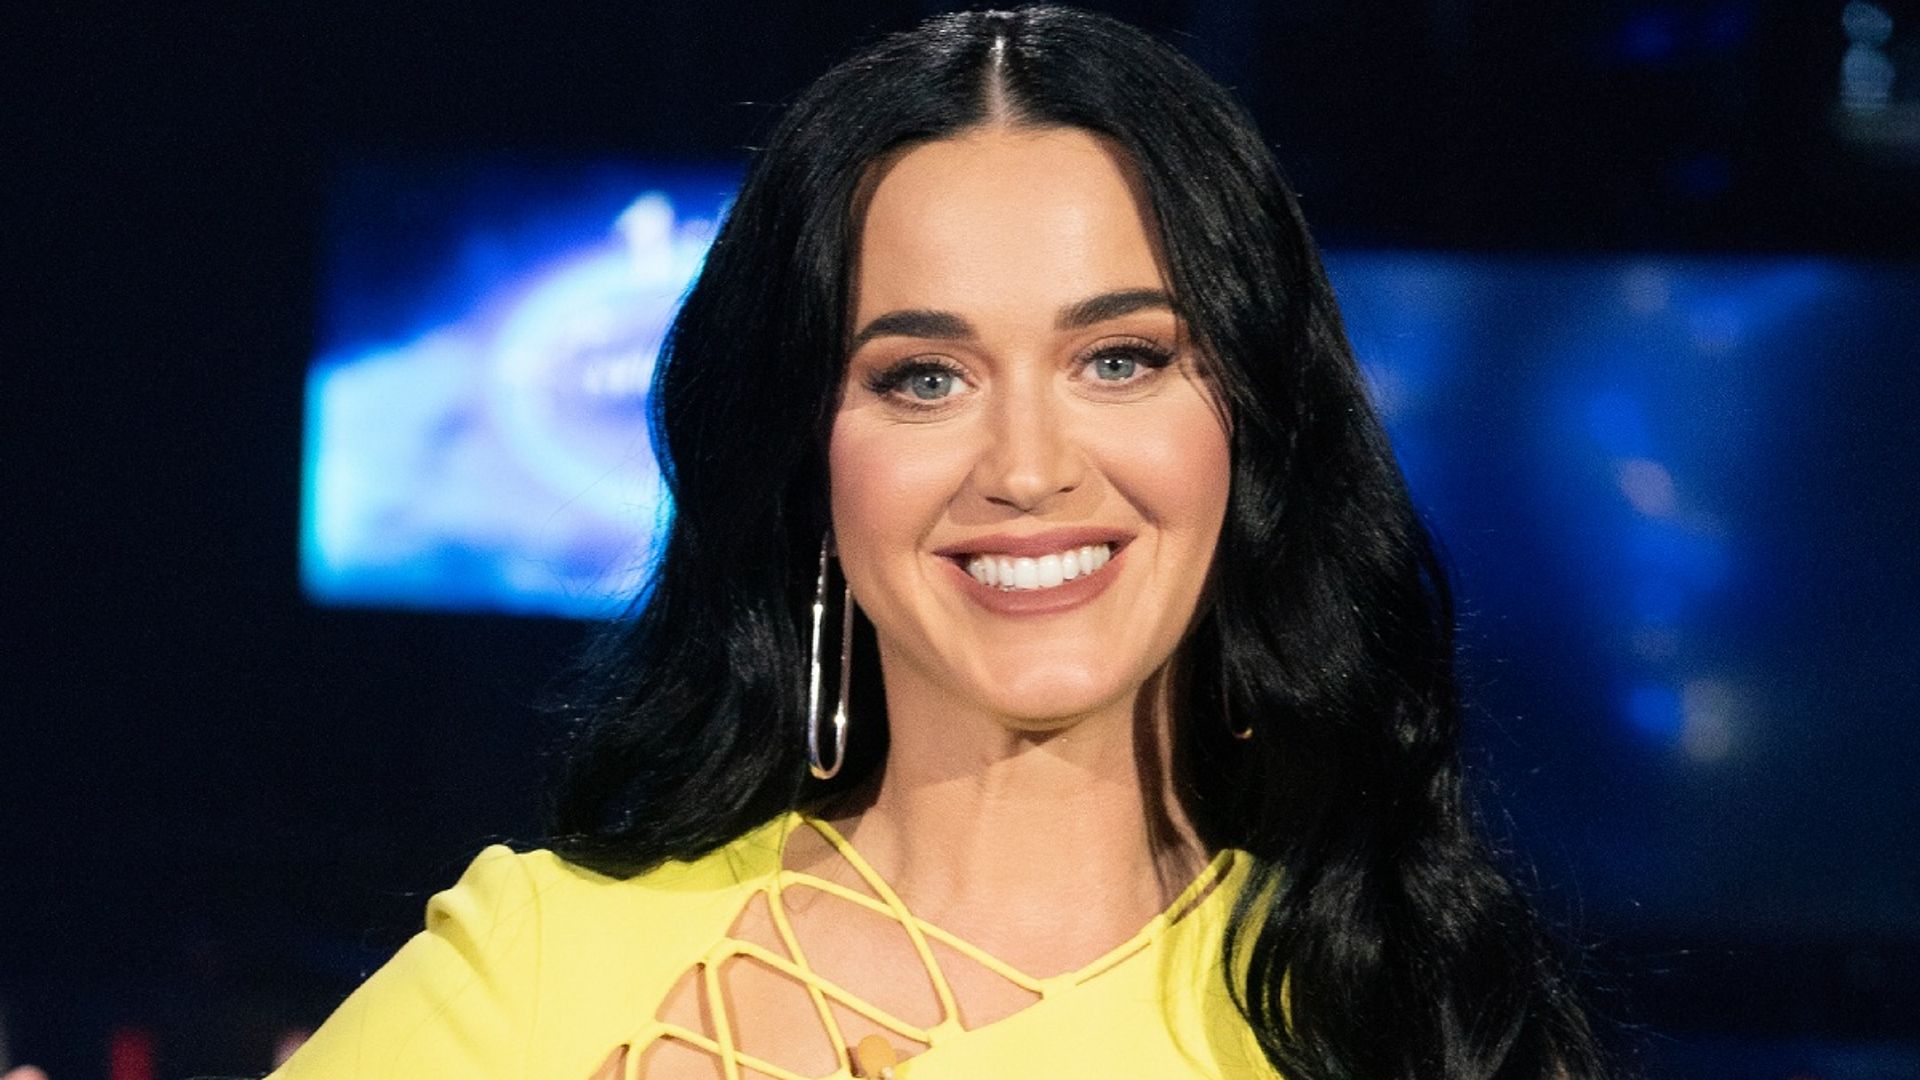 Katy Perry leaves viewers stunned in whimsical green pantsuit live on American Idol